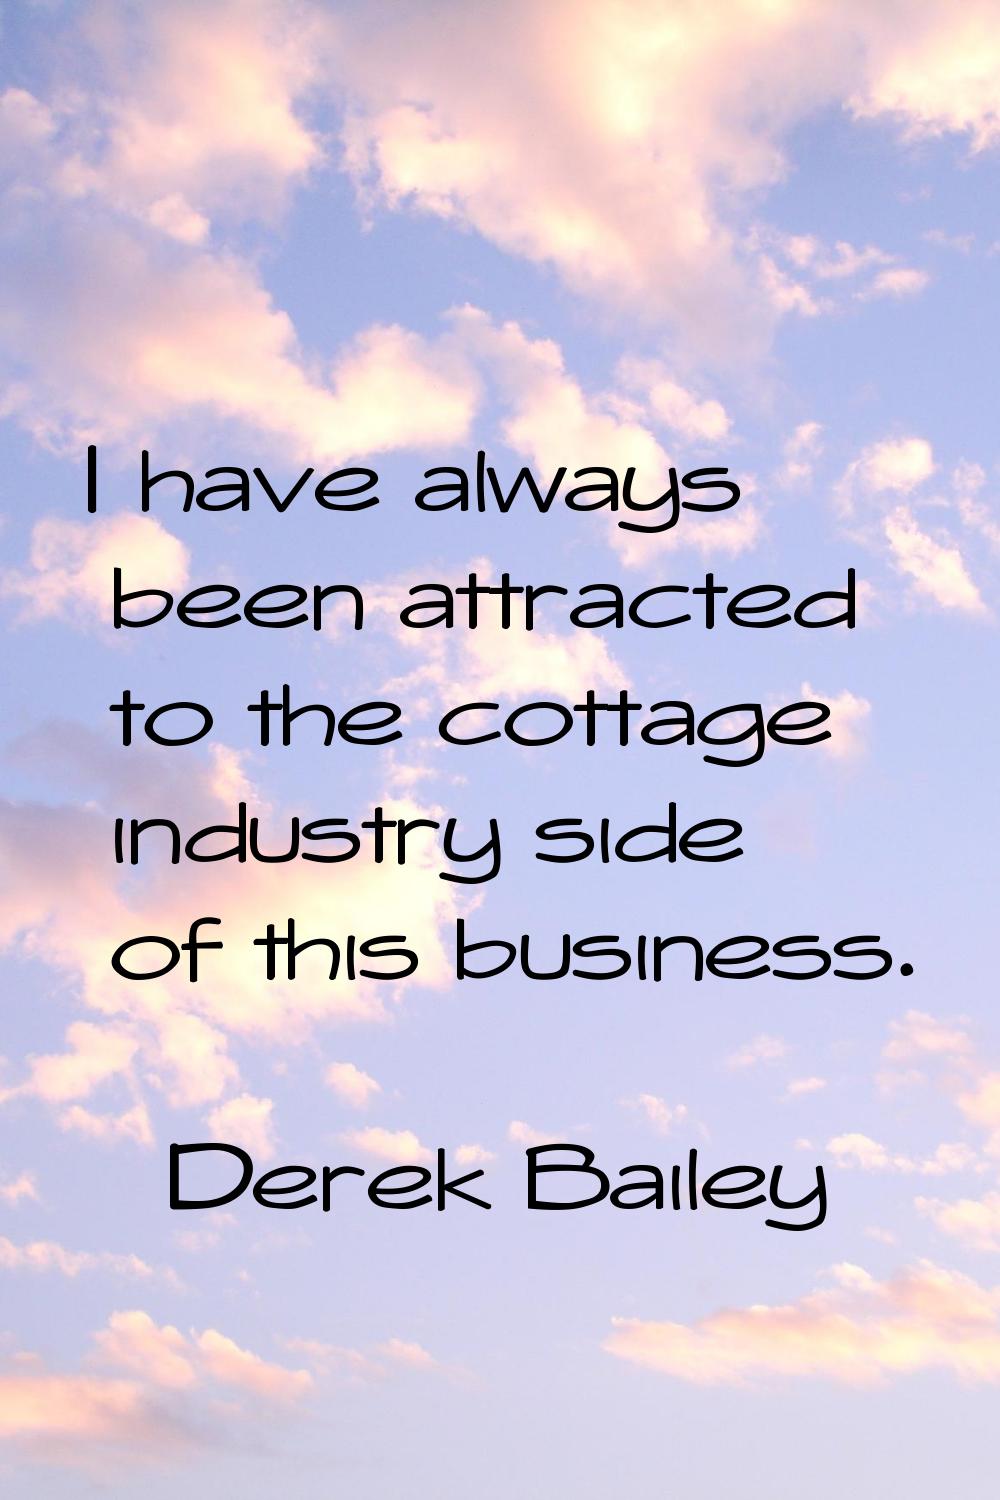 I have always been attracted to the cottage industry side of this business.